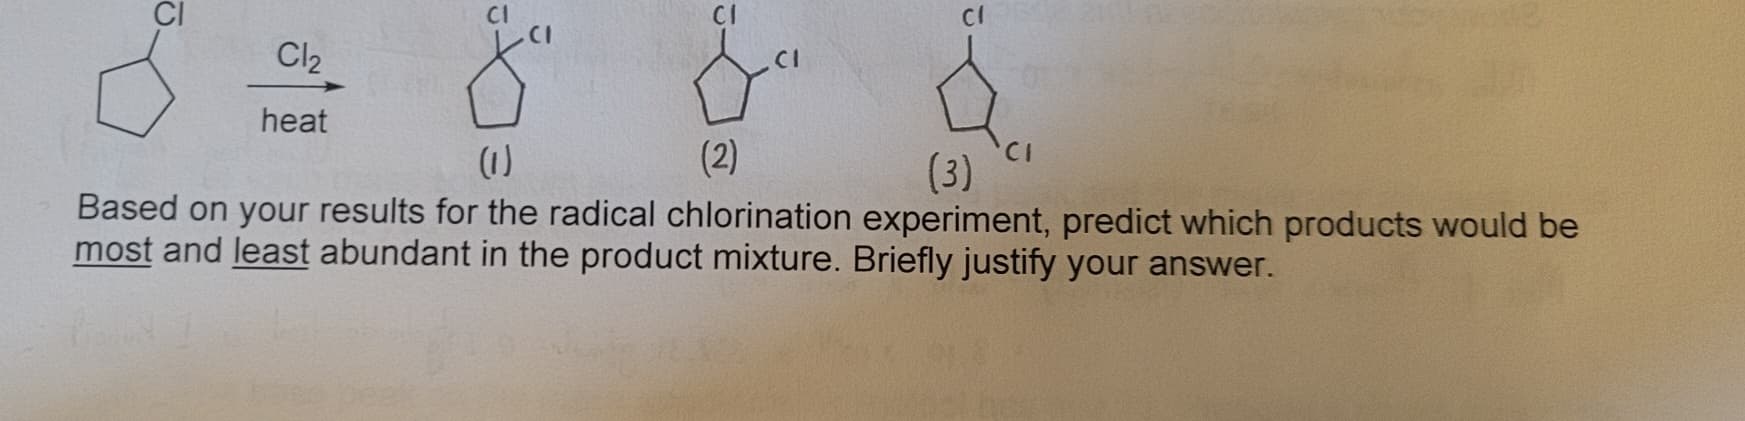 CI
Cl2
heat
8⁰
(1)
(2)
(3)
Based on your results for the radical chlorination experiment, predict which products would be
most and least abundant in the product mixture. Briefly justify your answer.
CI